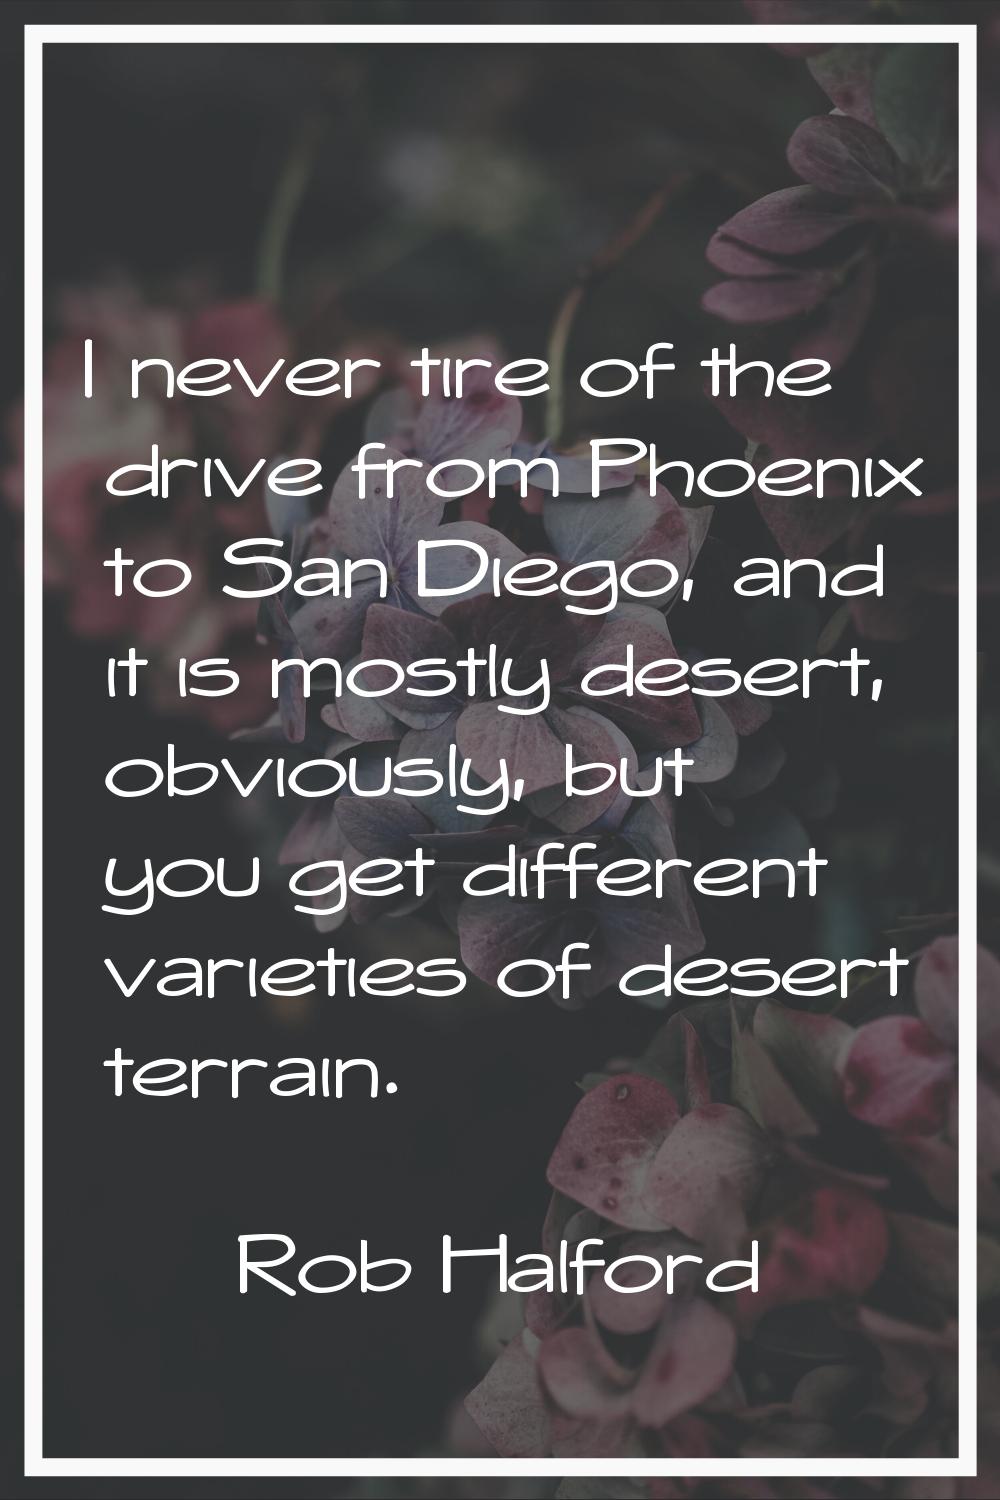 I never tire of the drive from Phoenix to San Diego, and it is mostly desert, obviously, but you ge